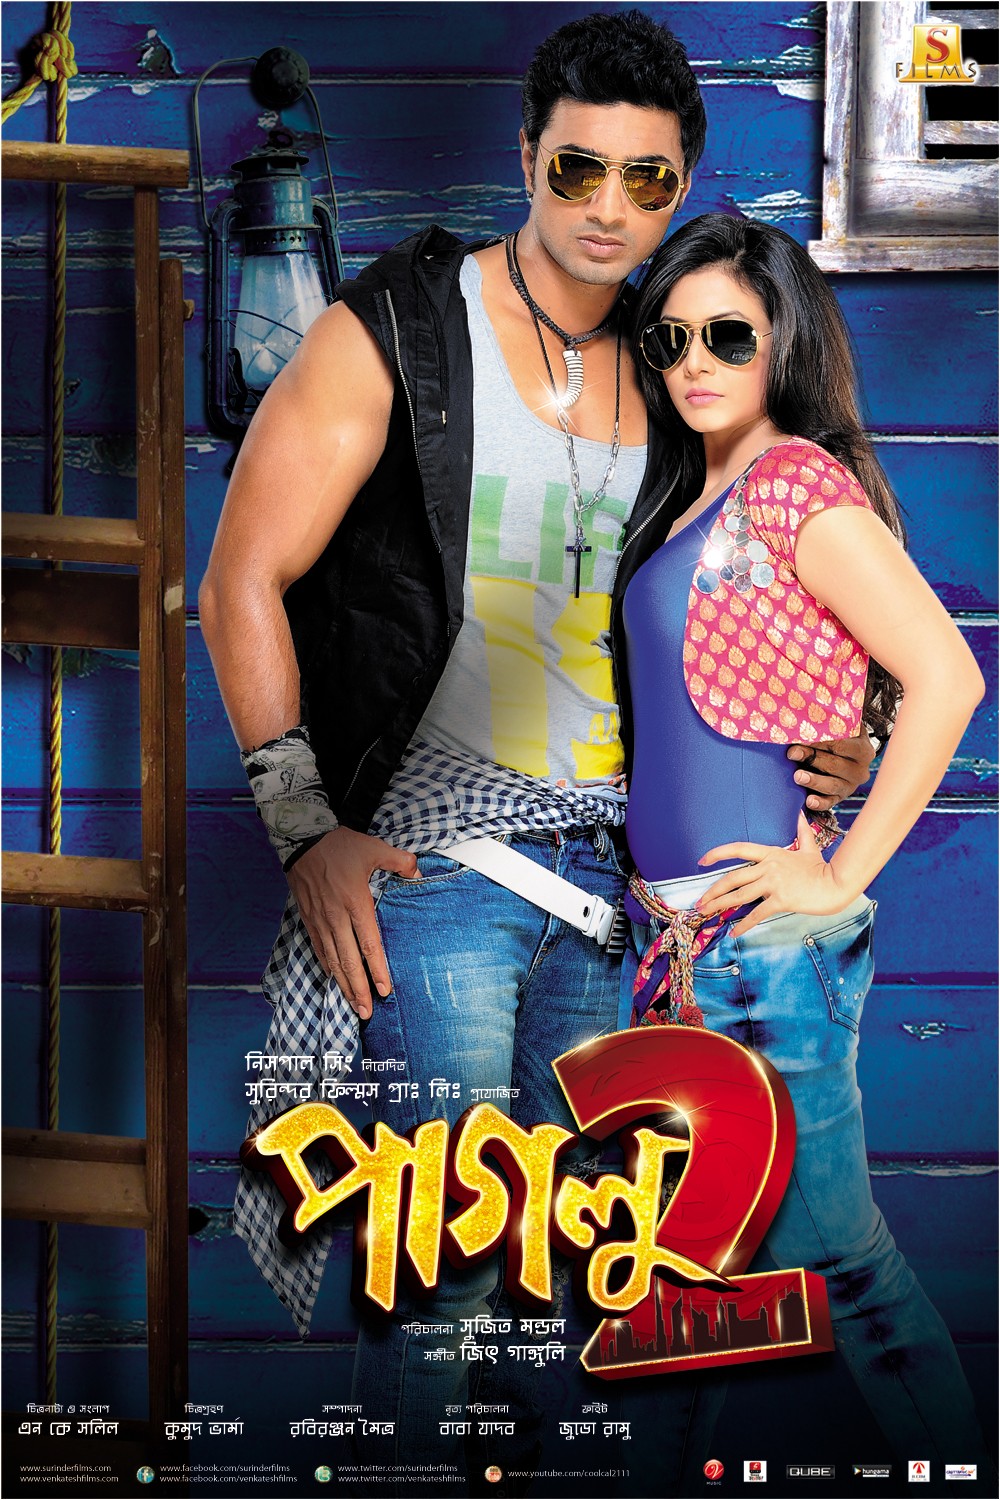 Extra Large Movie Poster Image for Paglu 2 (#2 of 4)